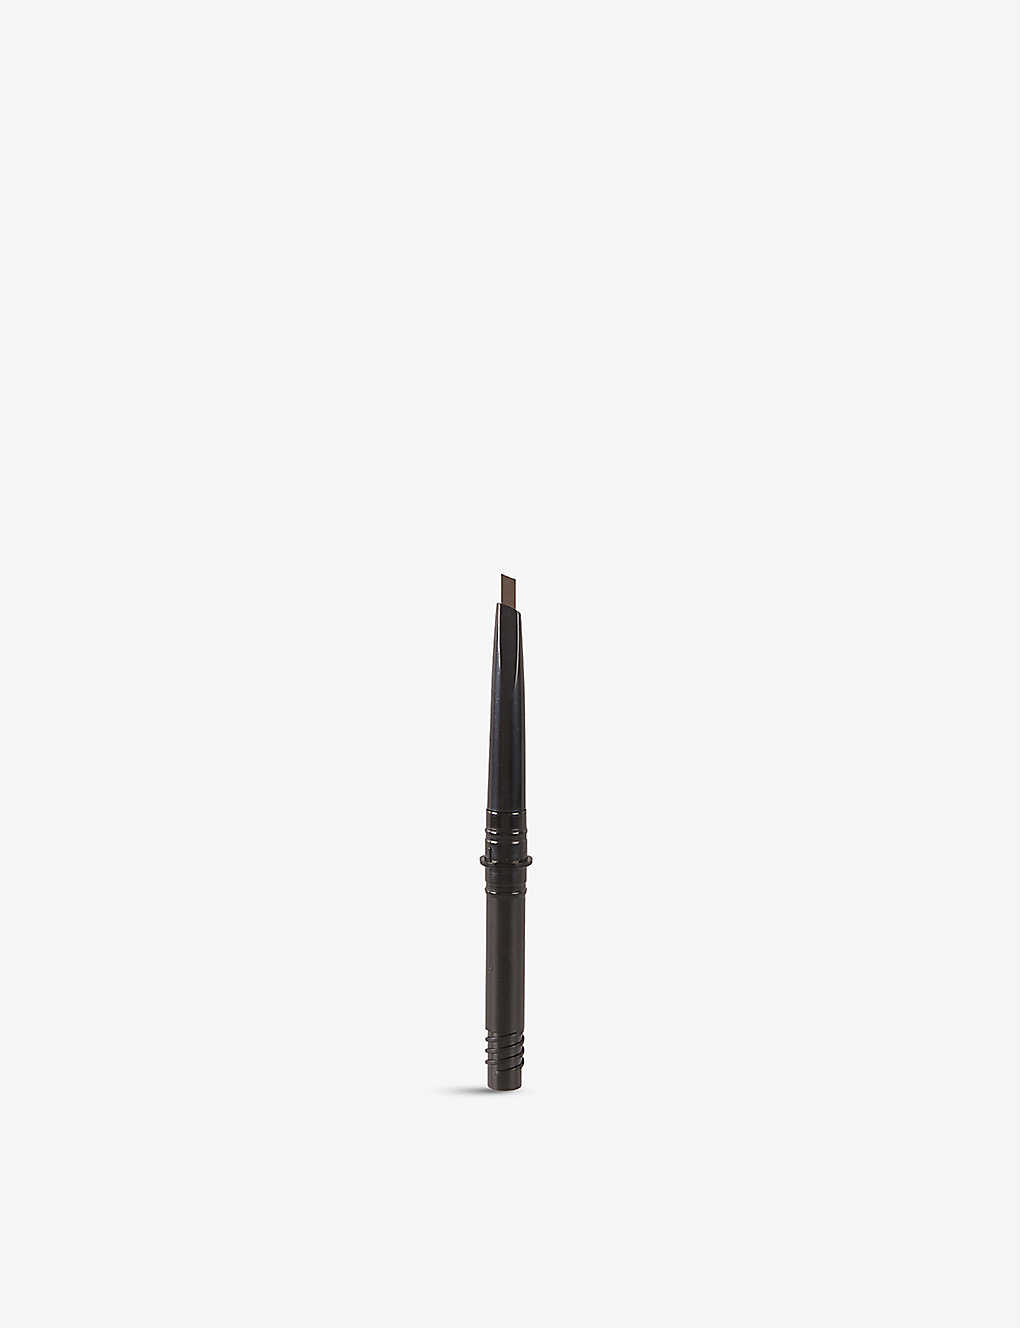 Charlotte Tilbury Brow Cheat Refill Eyebrow Pencil 0.1g In Natural Brown